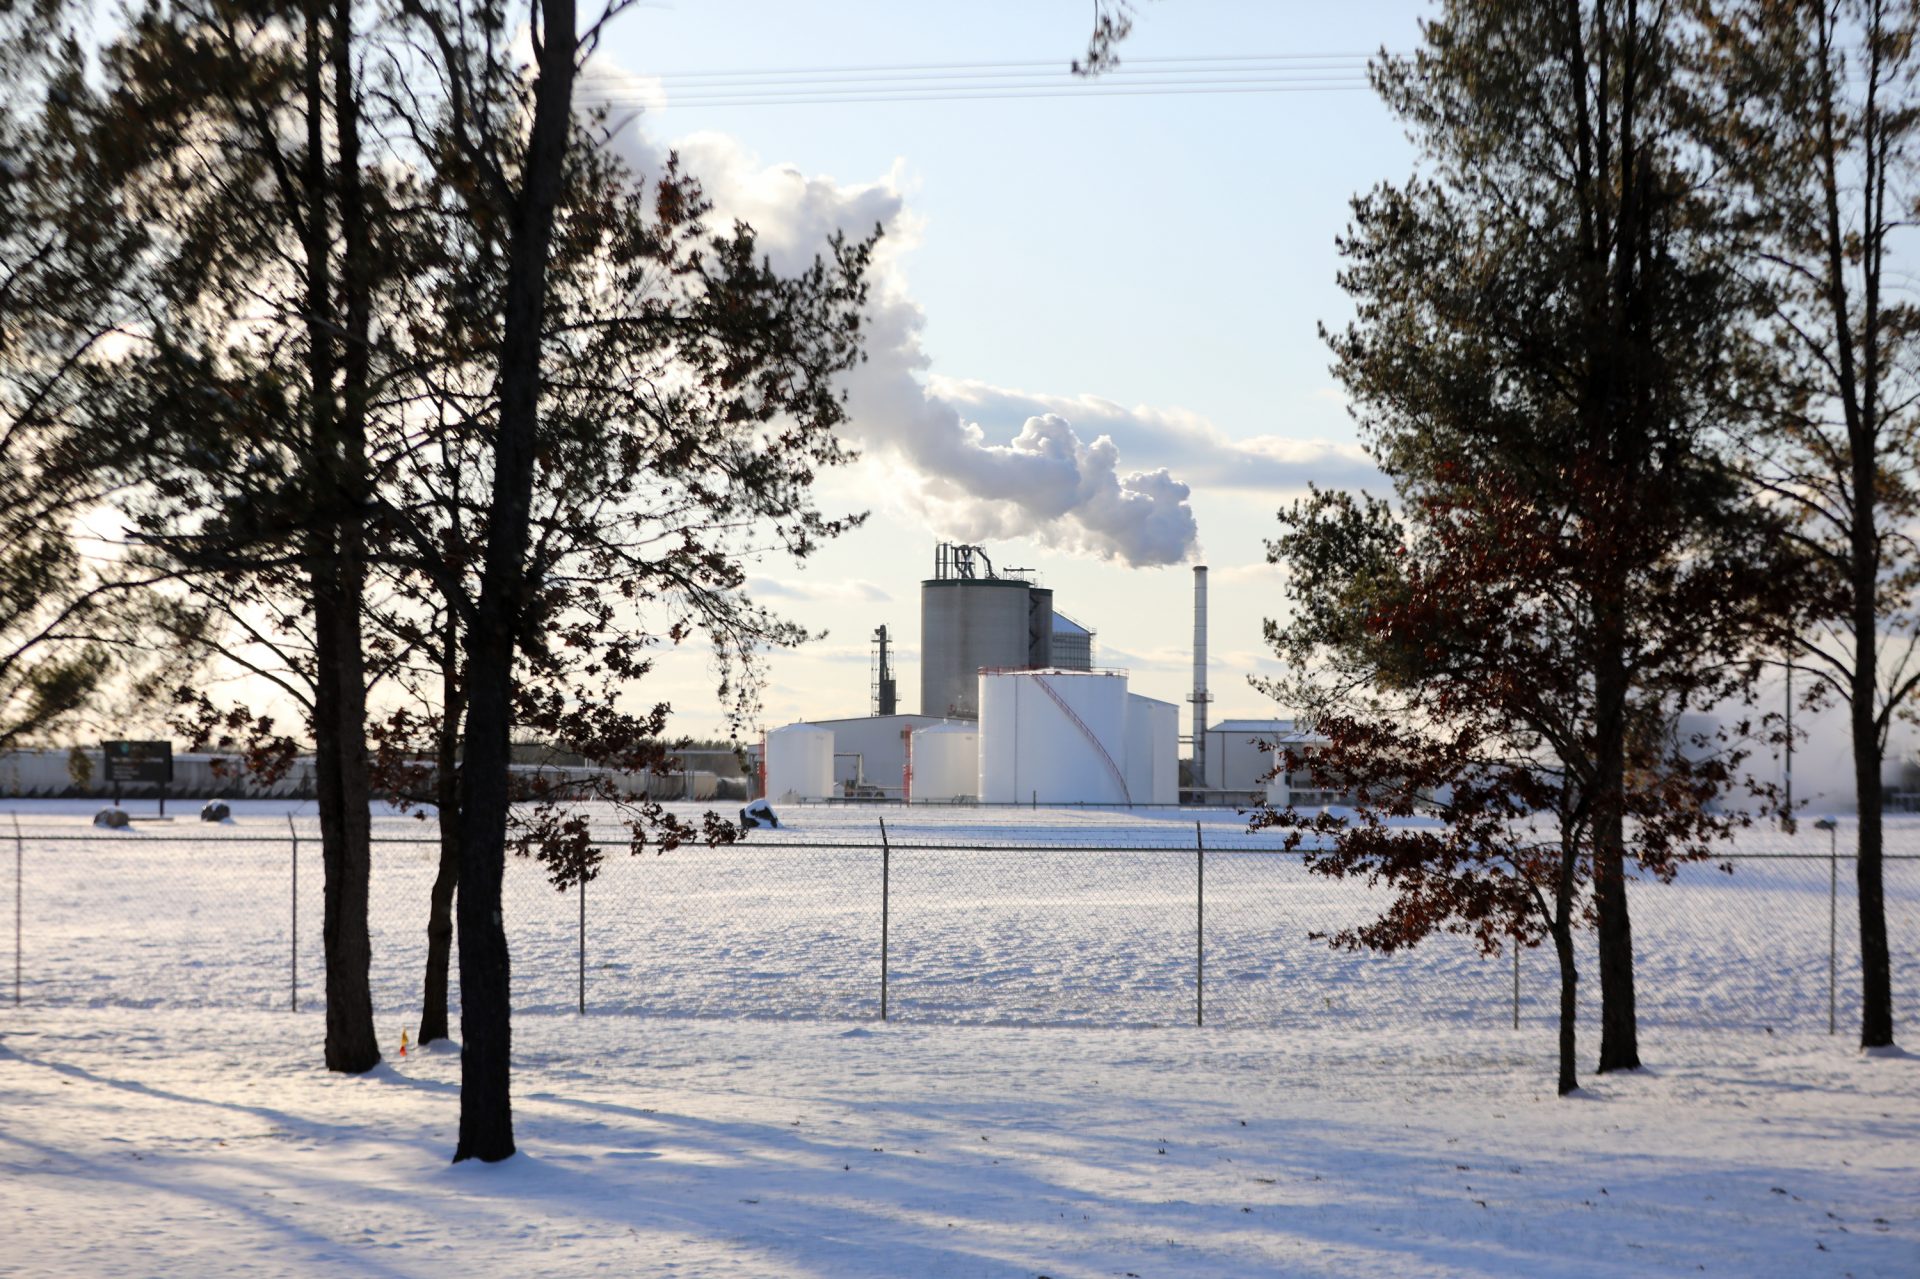 The Marquis Energy plant, which produces ethanol, is located outside Necedah, Wis. Michael Kruchten worked there before he started treatments for lung cancer in 2011.